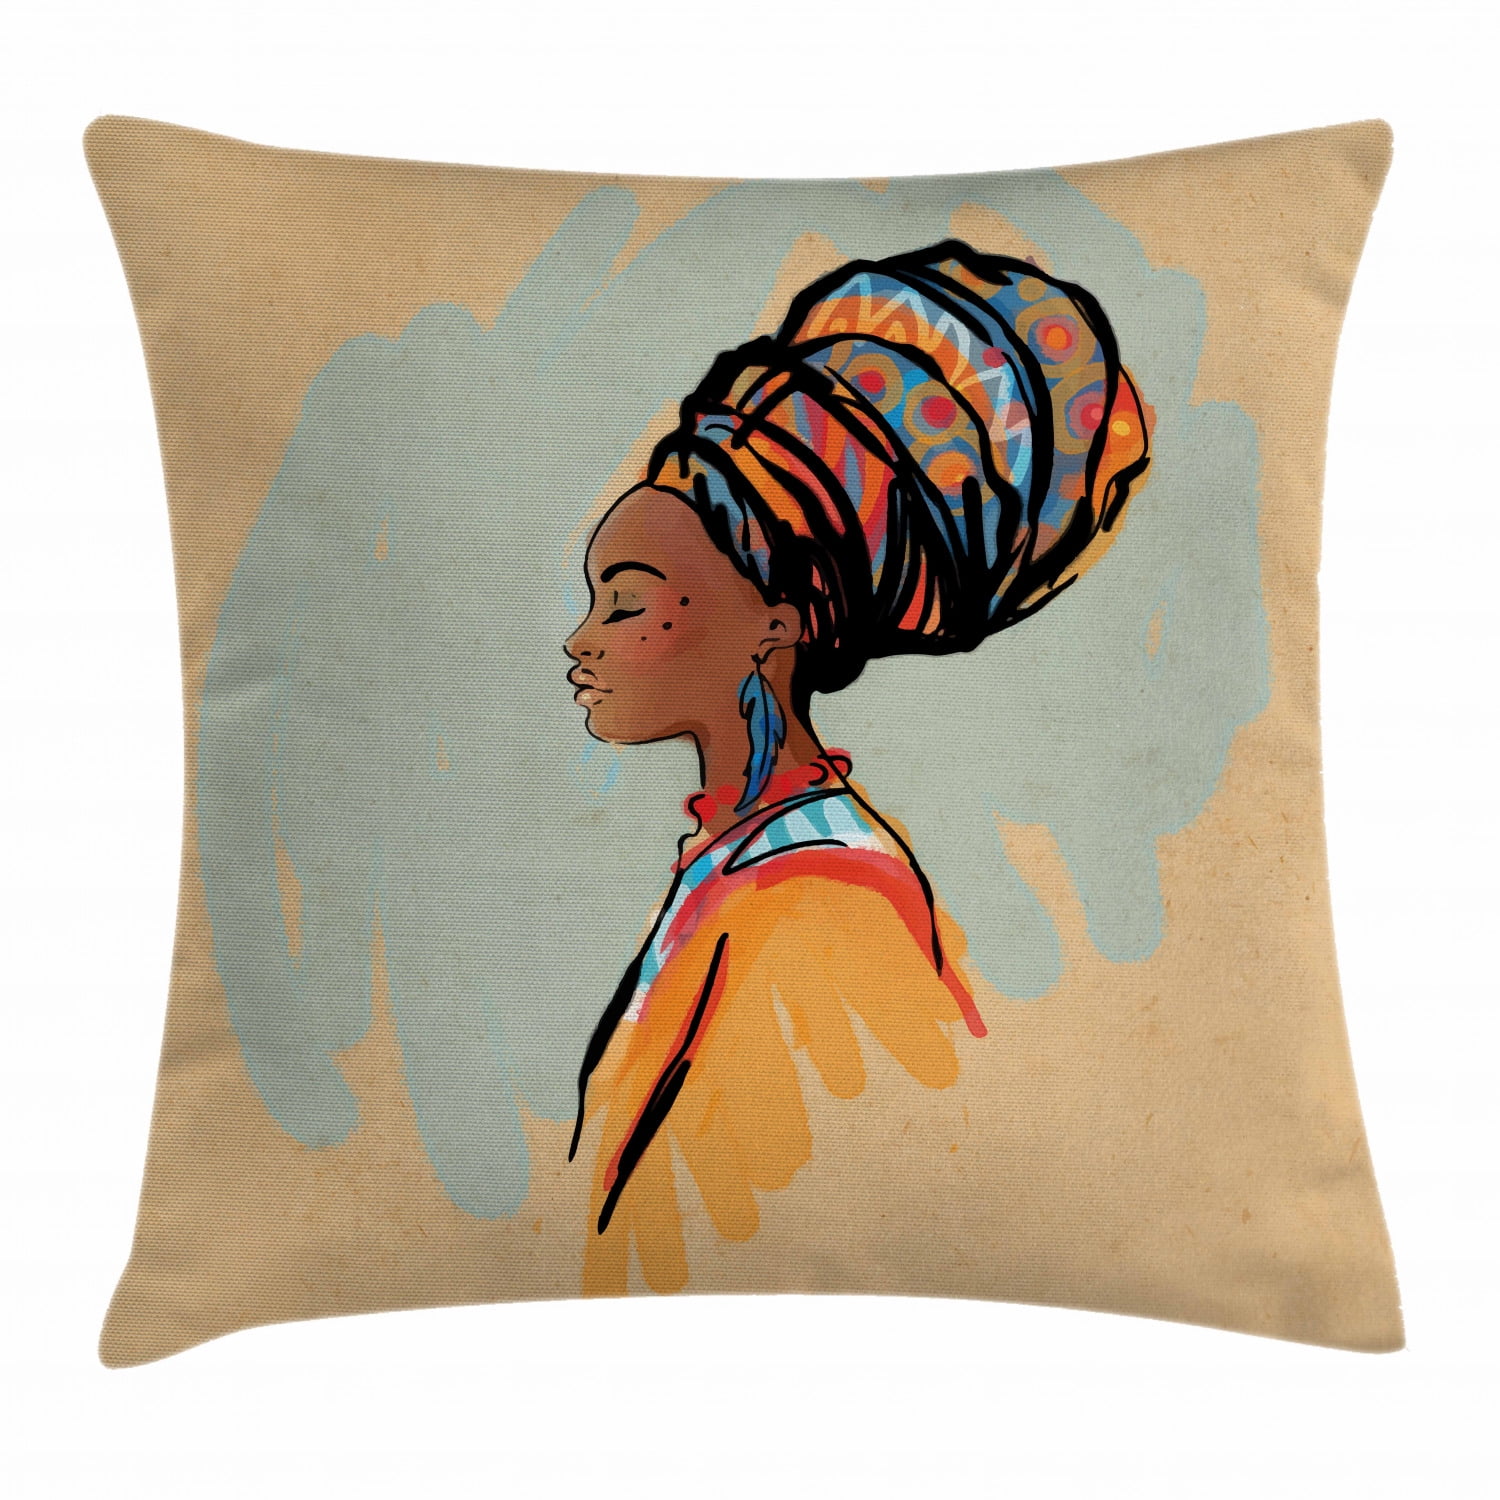 African Woman Hand Embroidered Pillow Cover Female in Nature Cushion Cover Desert Illustration Pillowcase Ethnic Home Decor Gift